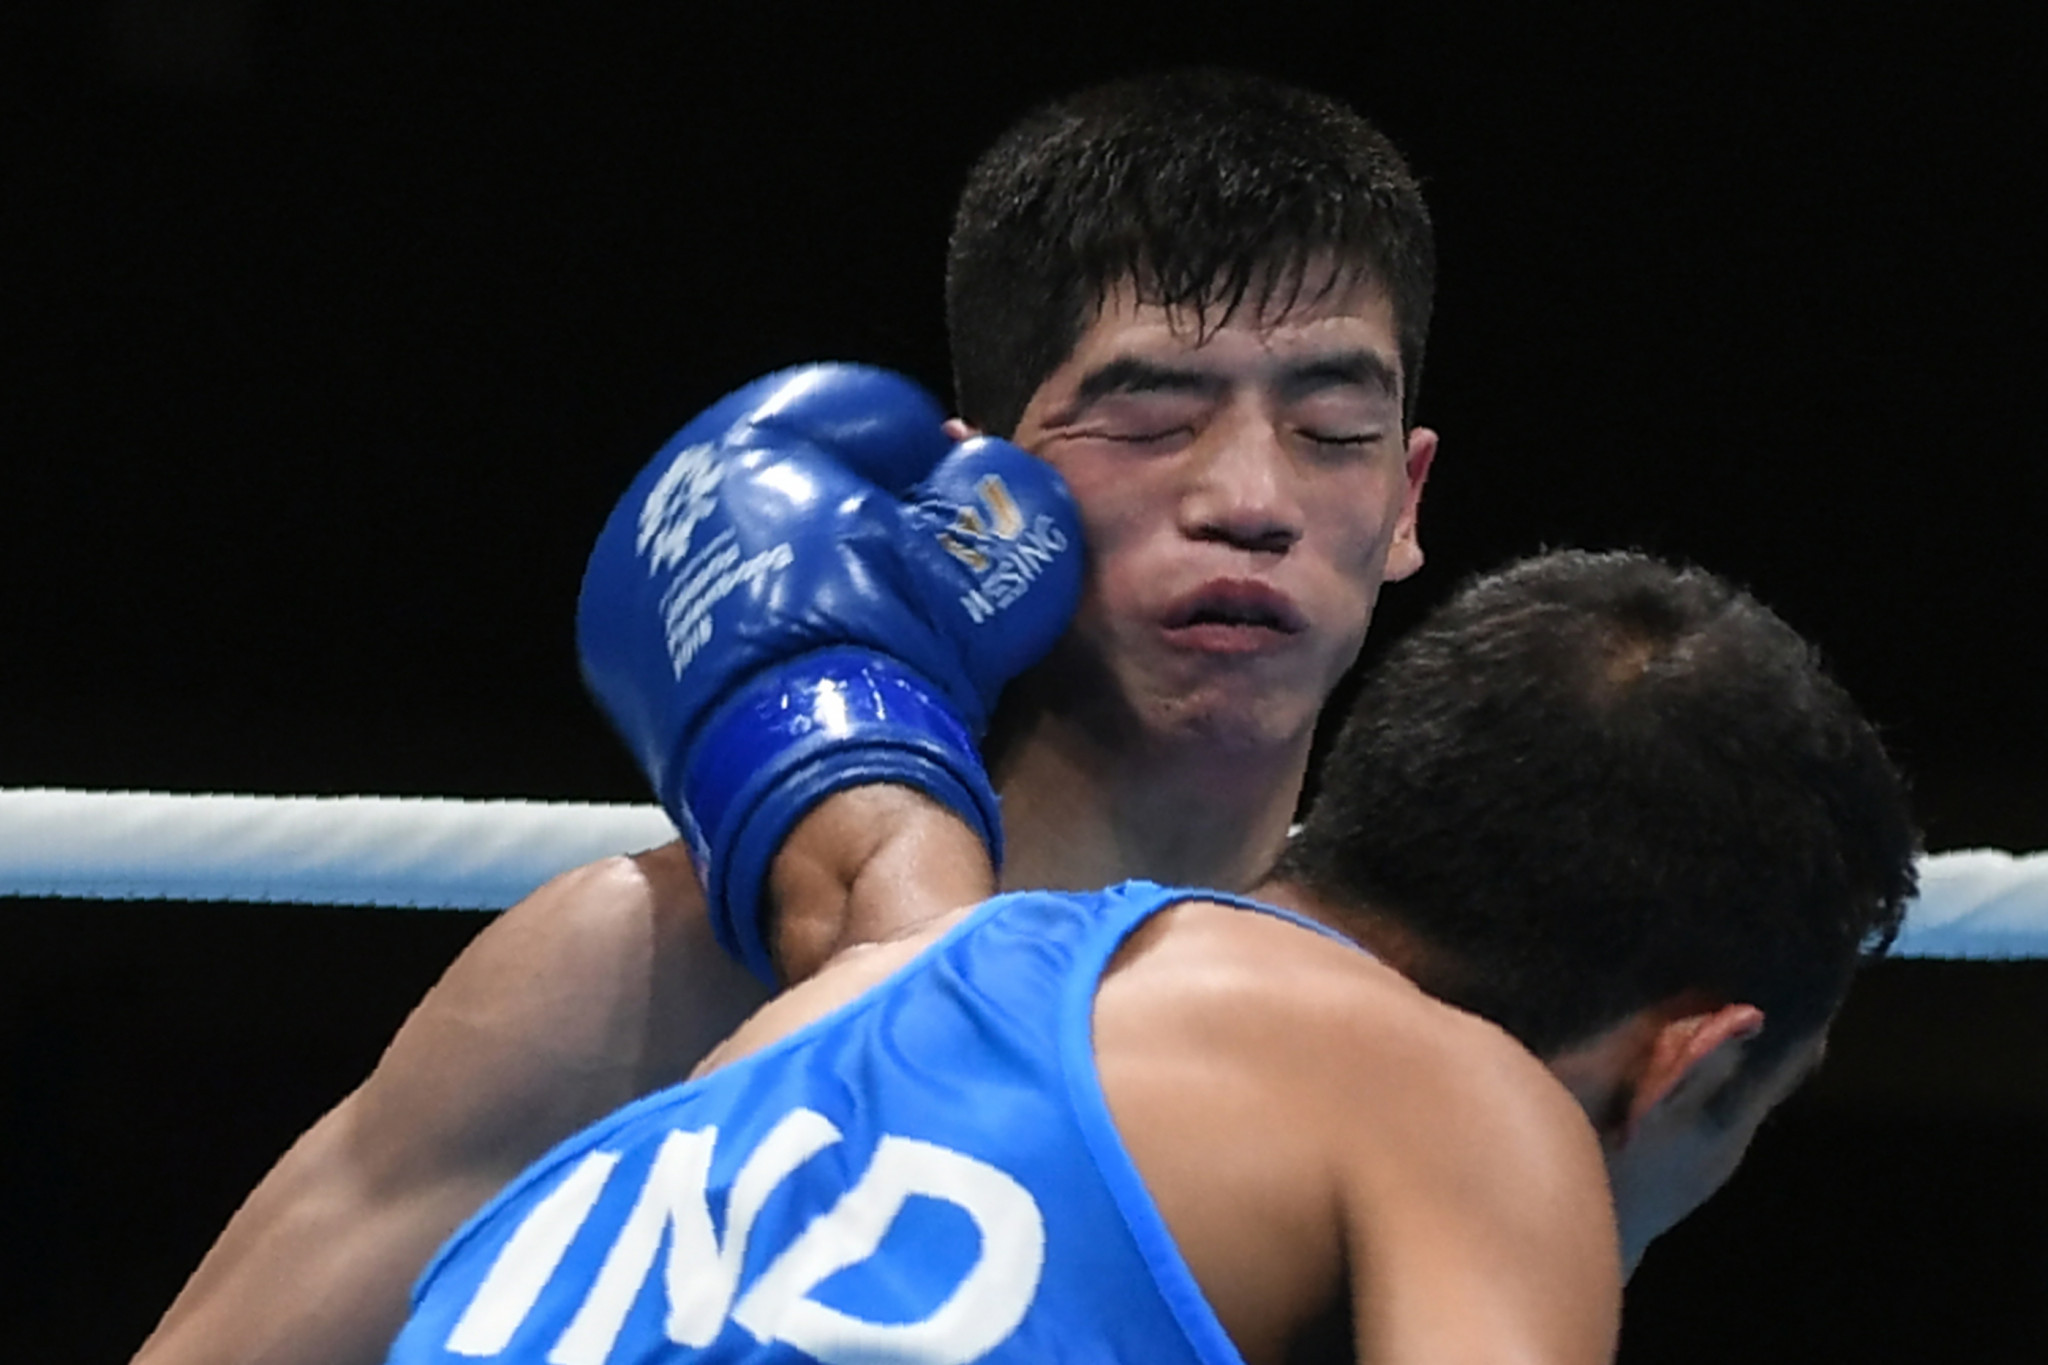 India's Amit Panghal triumphed in the flyweight division ©Getty Images